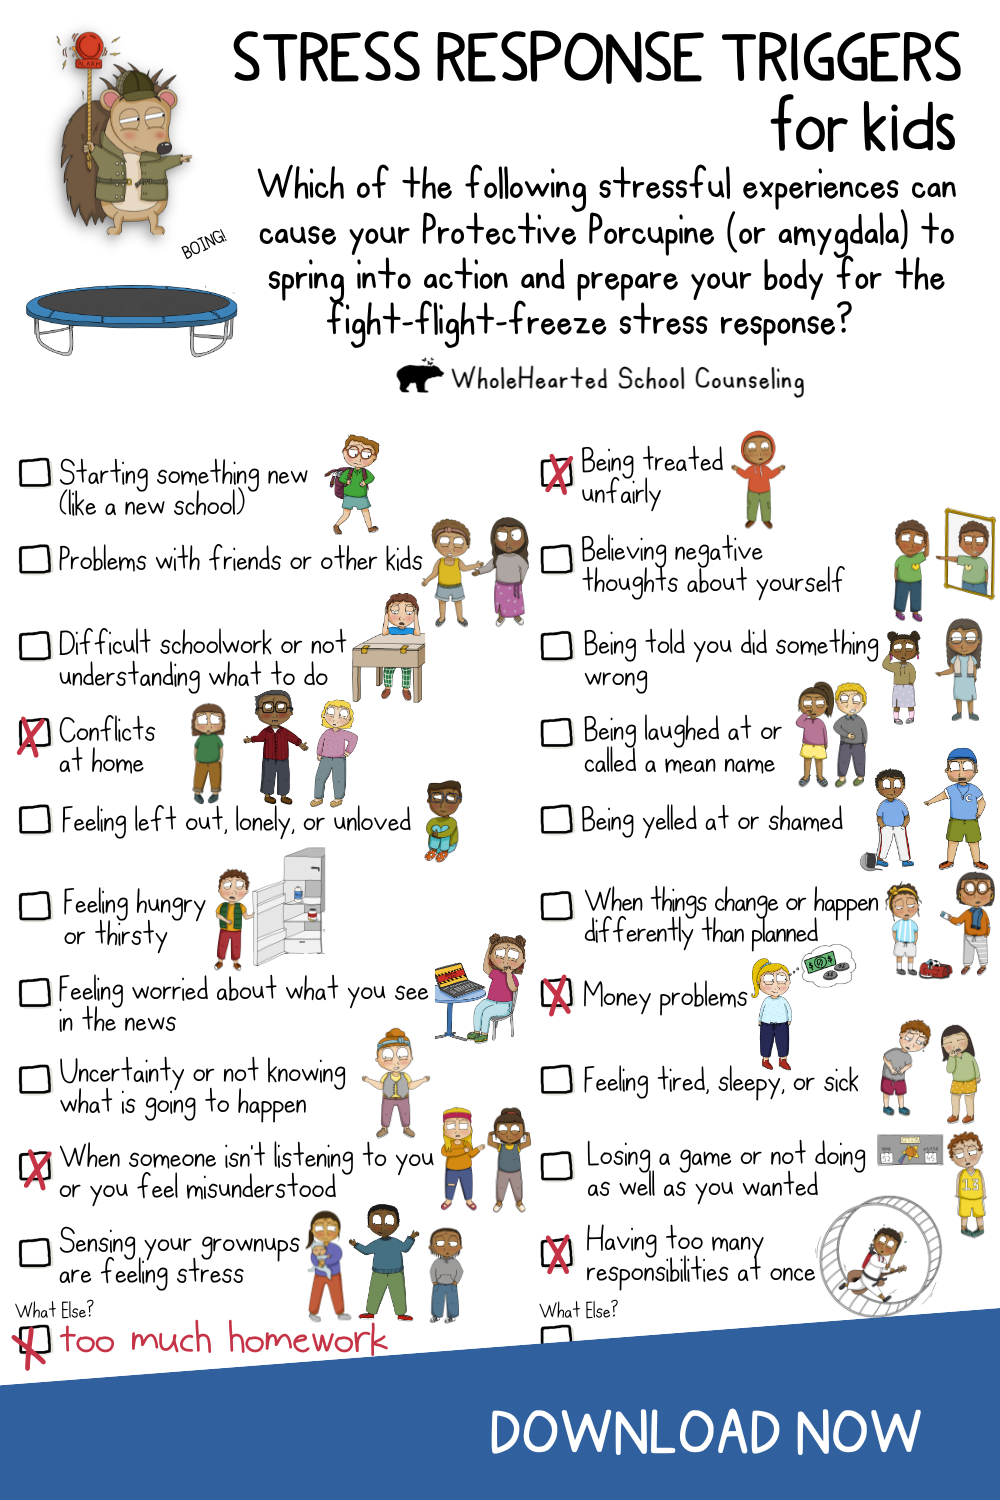 Checklist of stress response triggers for kids with cute illustrations.